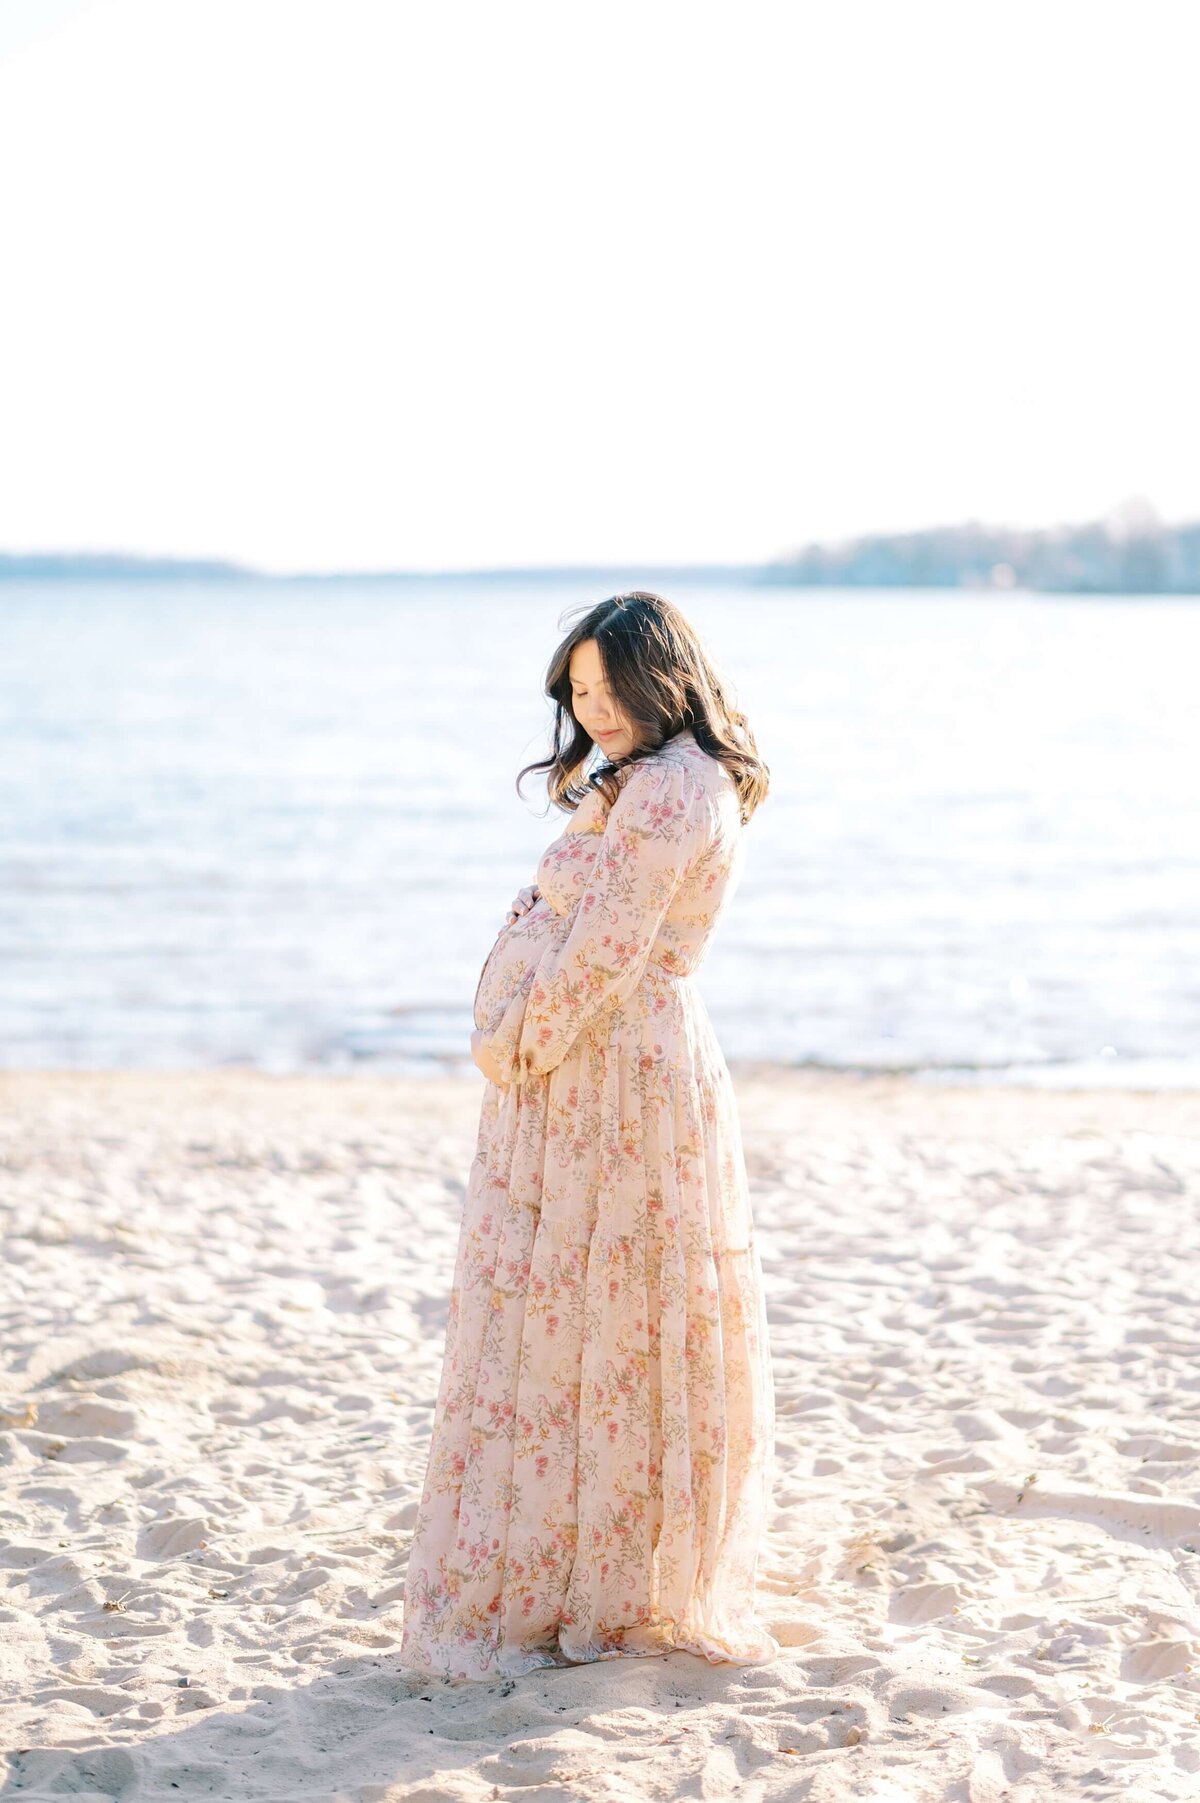 Charlotte Maternity Photographer, Melissa Mayrie Photography captures an expecting mama on a windy beach while cradling her belly in a pink floral dress.